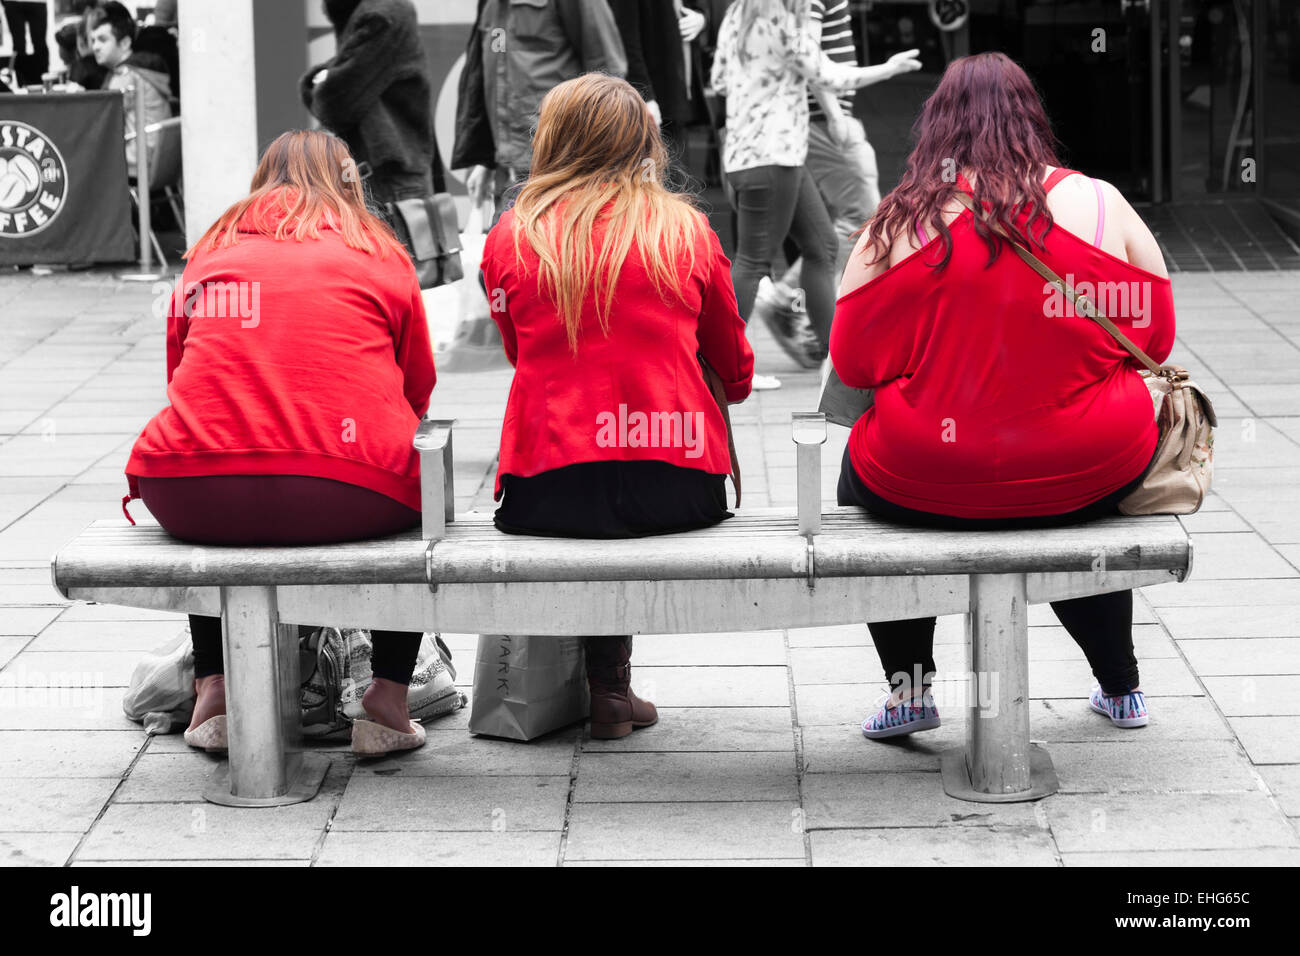 Three young women of different sizes wearing red tops sitting on bench with pedestrians walking past in monochrome at Bristol Stock Photo